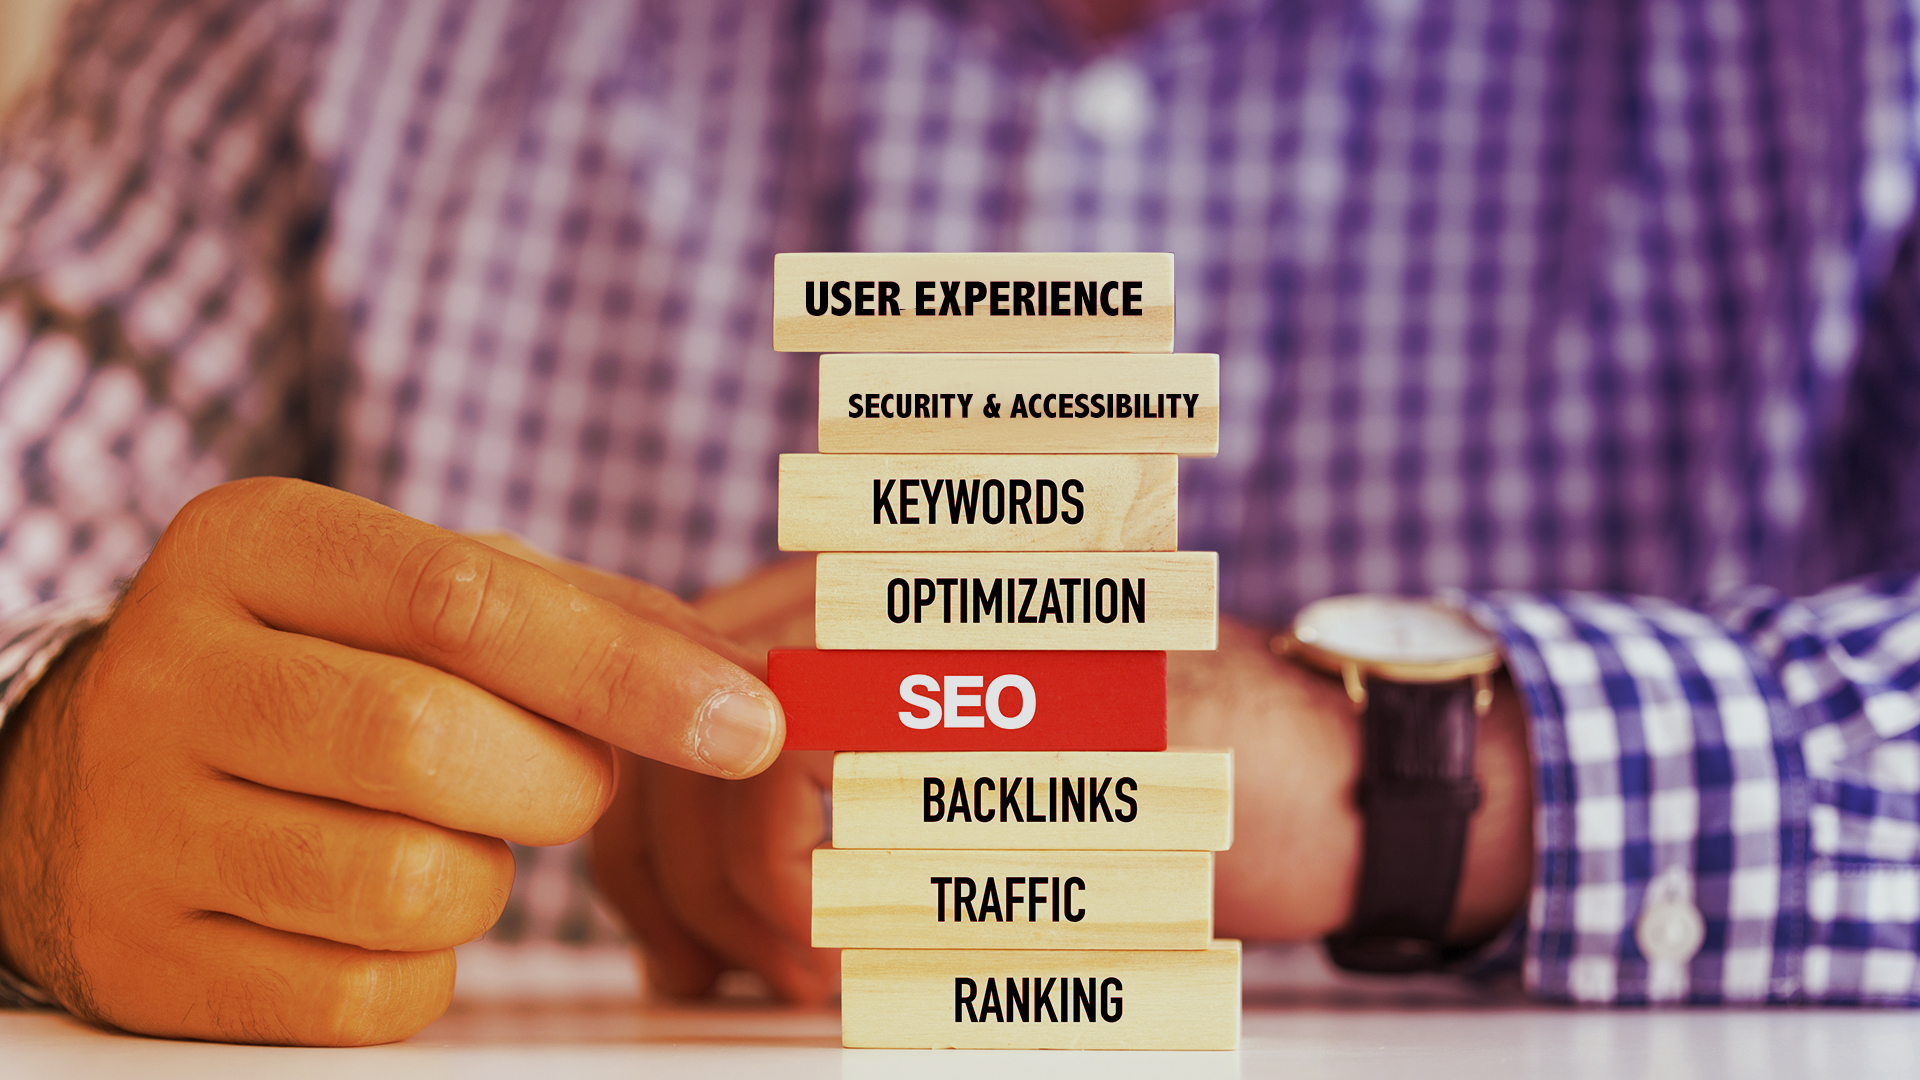 SEO is more than just keywords